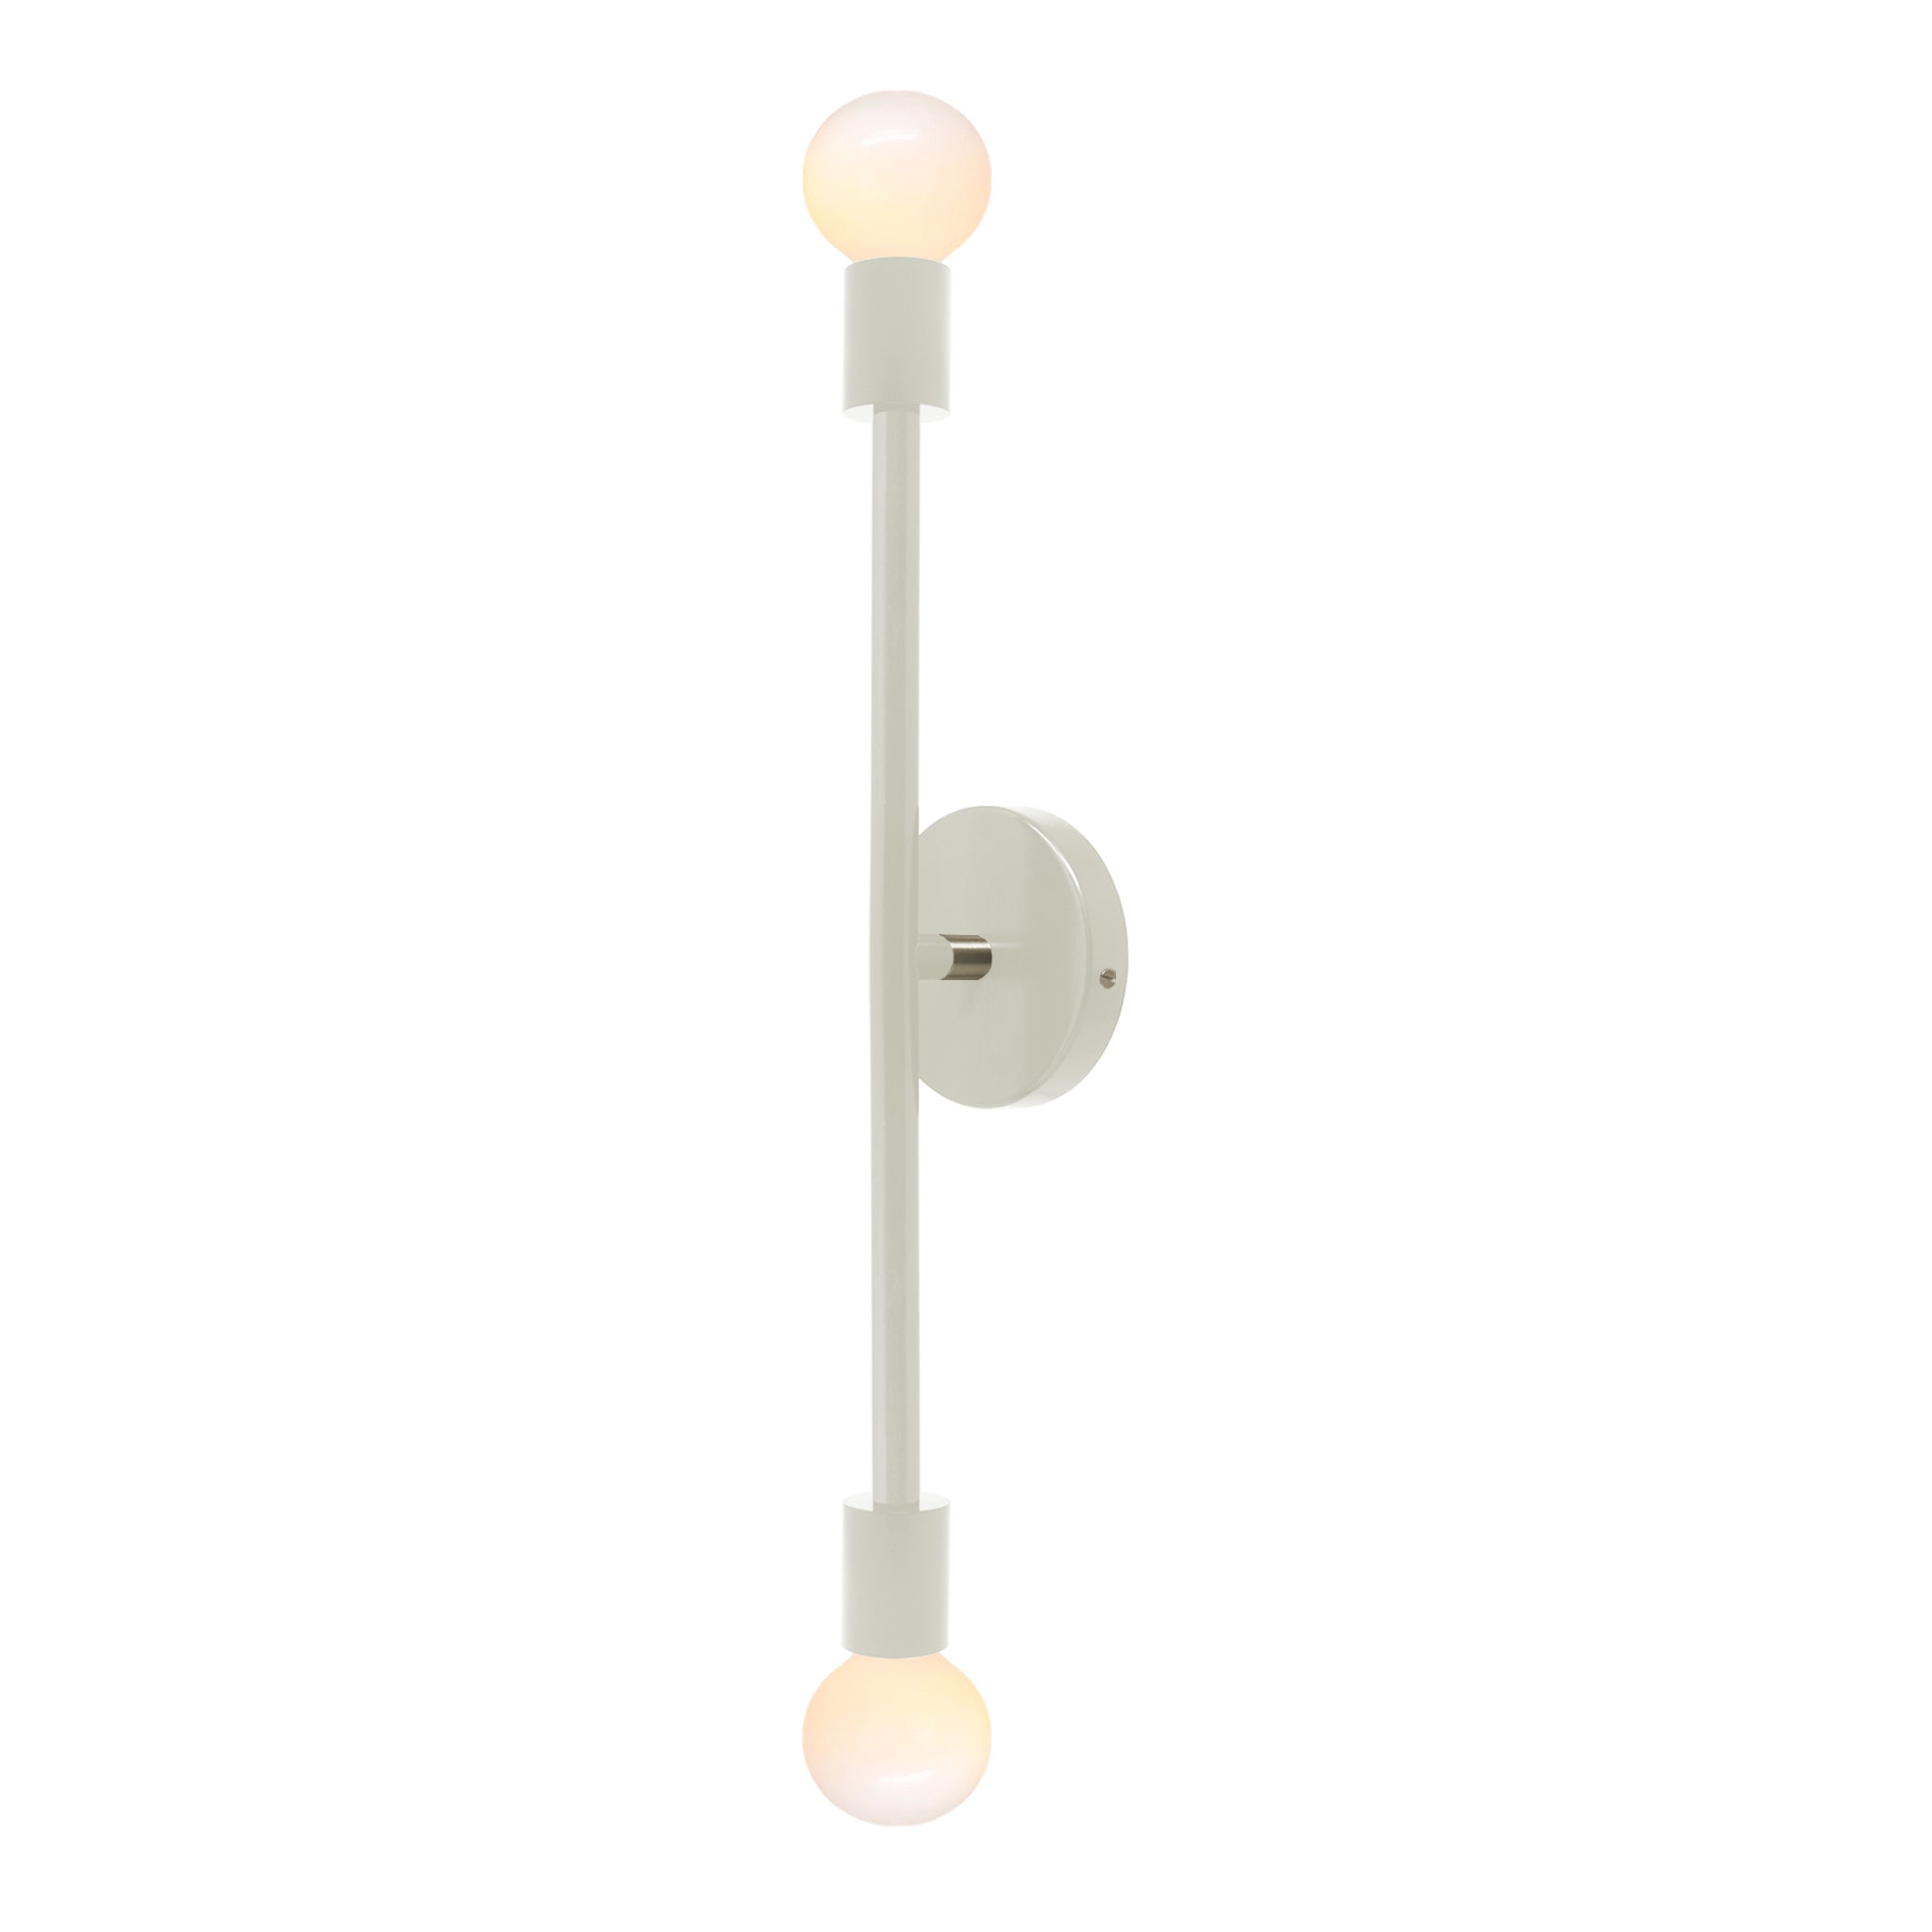 Nickel and bone color Pilot sconce 23" Dutton Brown lighting